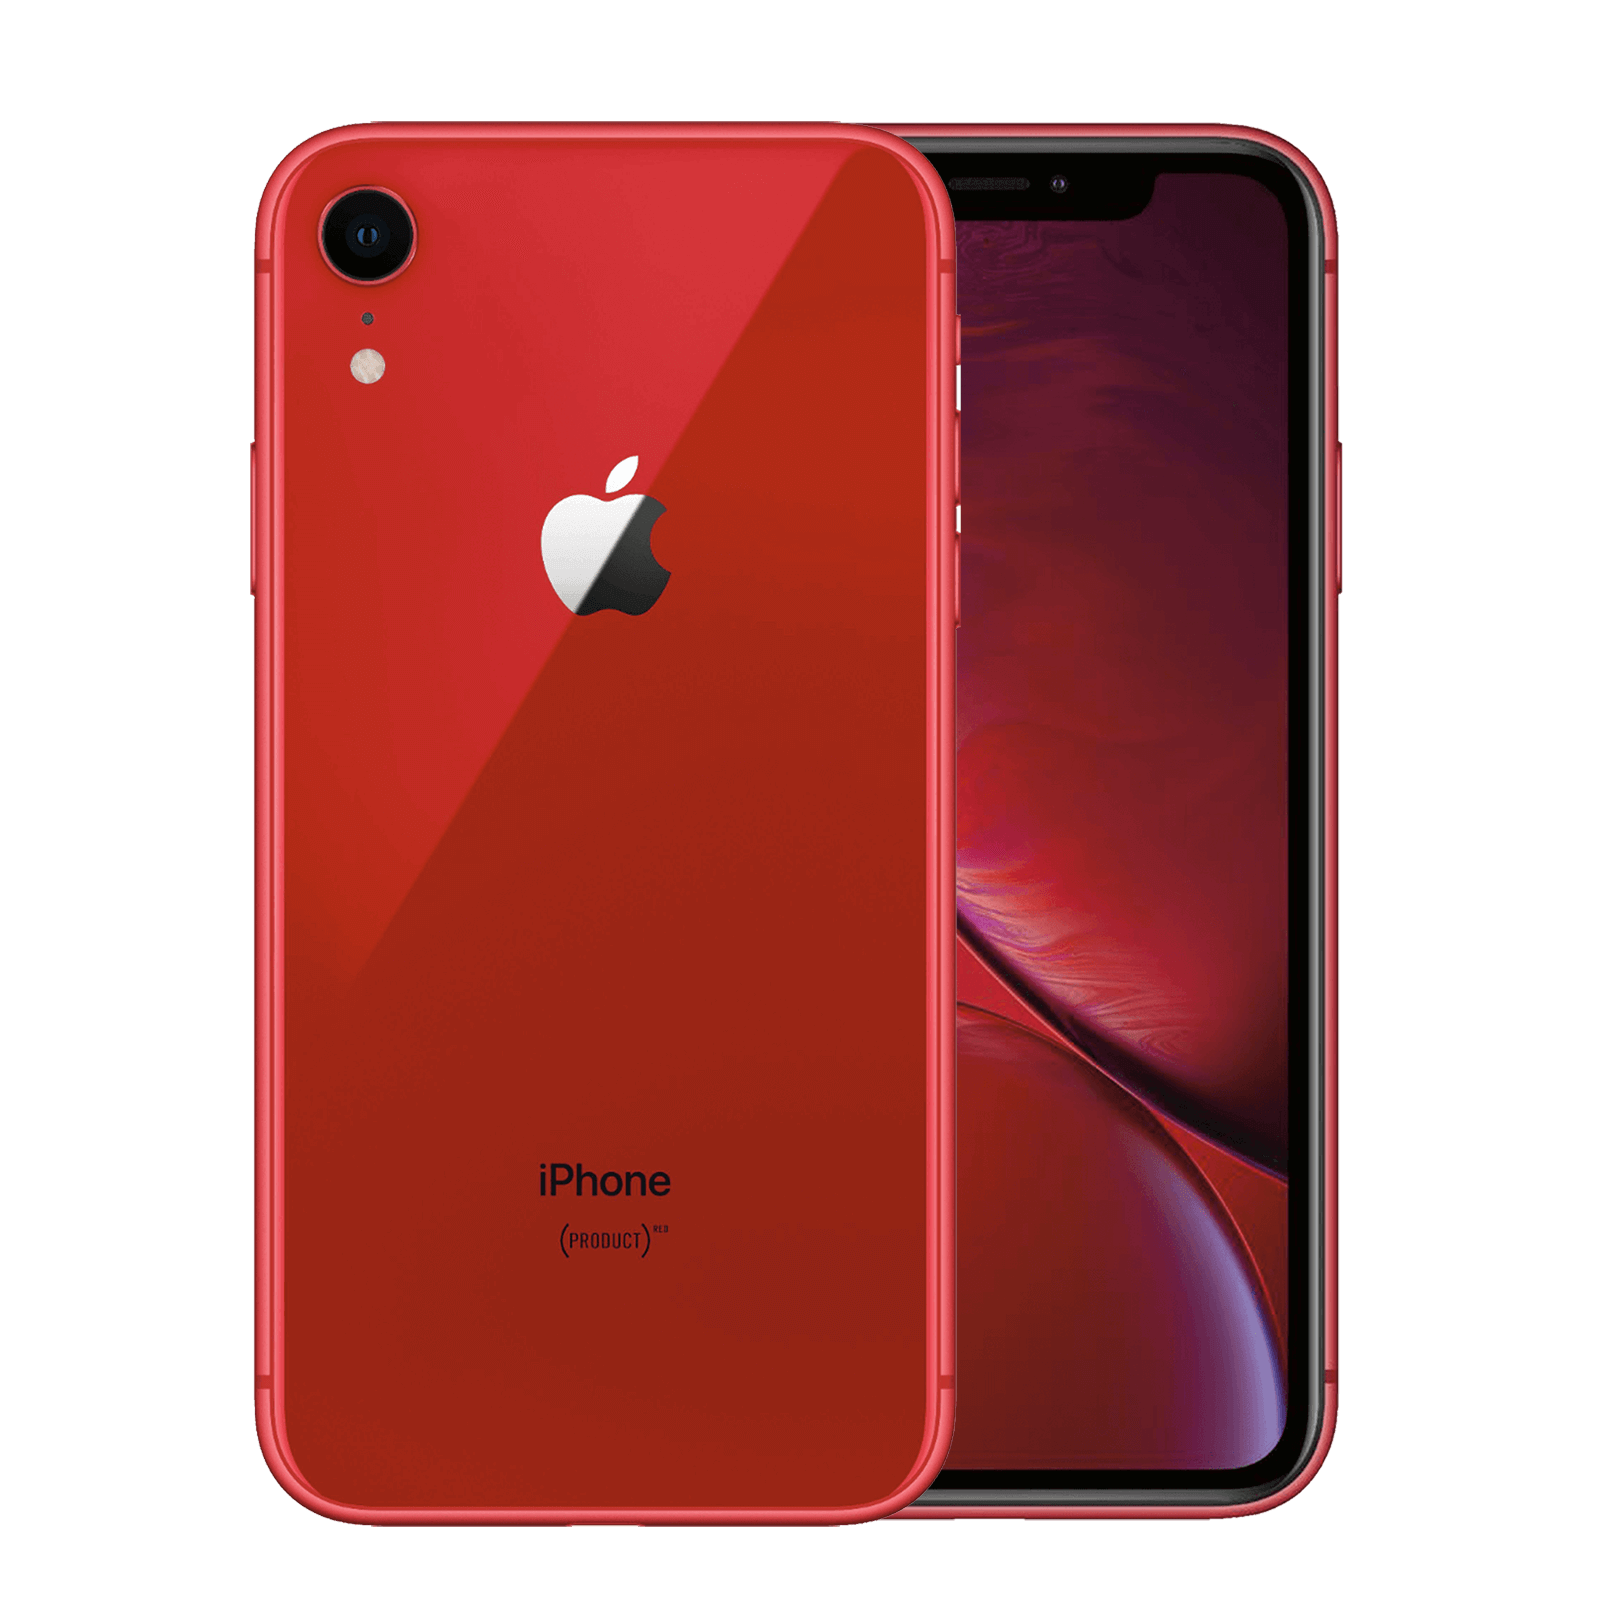 Apple iPhone XR 128GB Product Red Very Good - Sprint